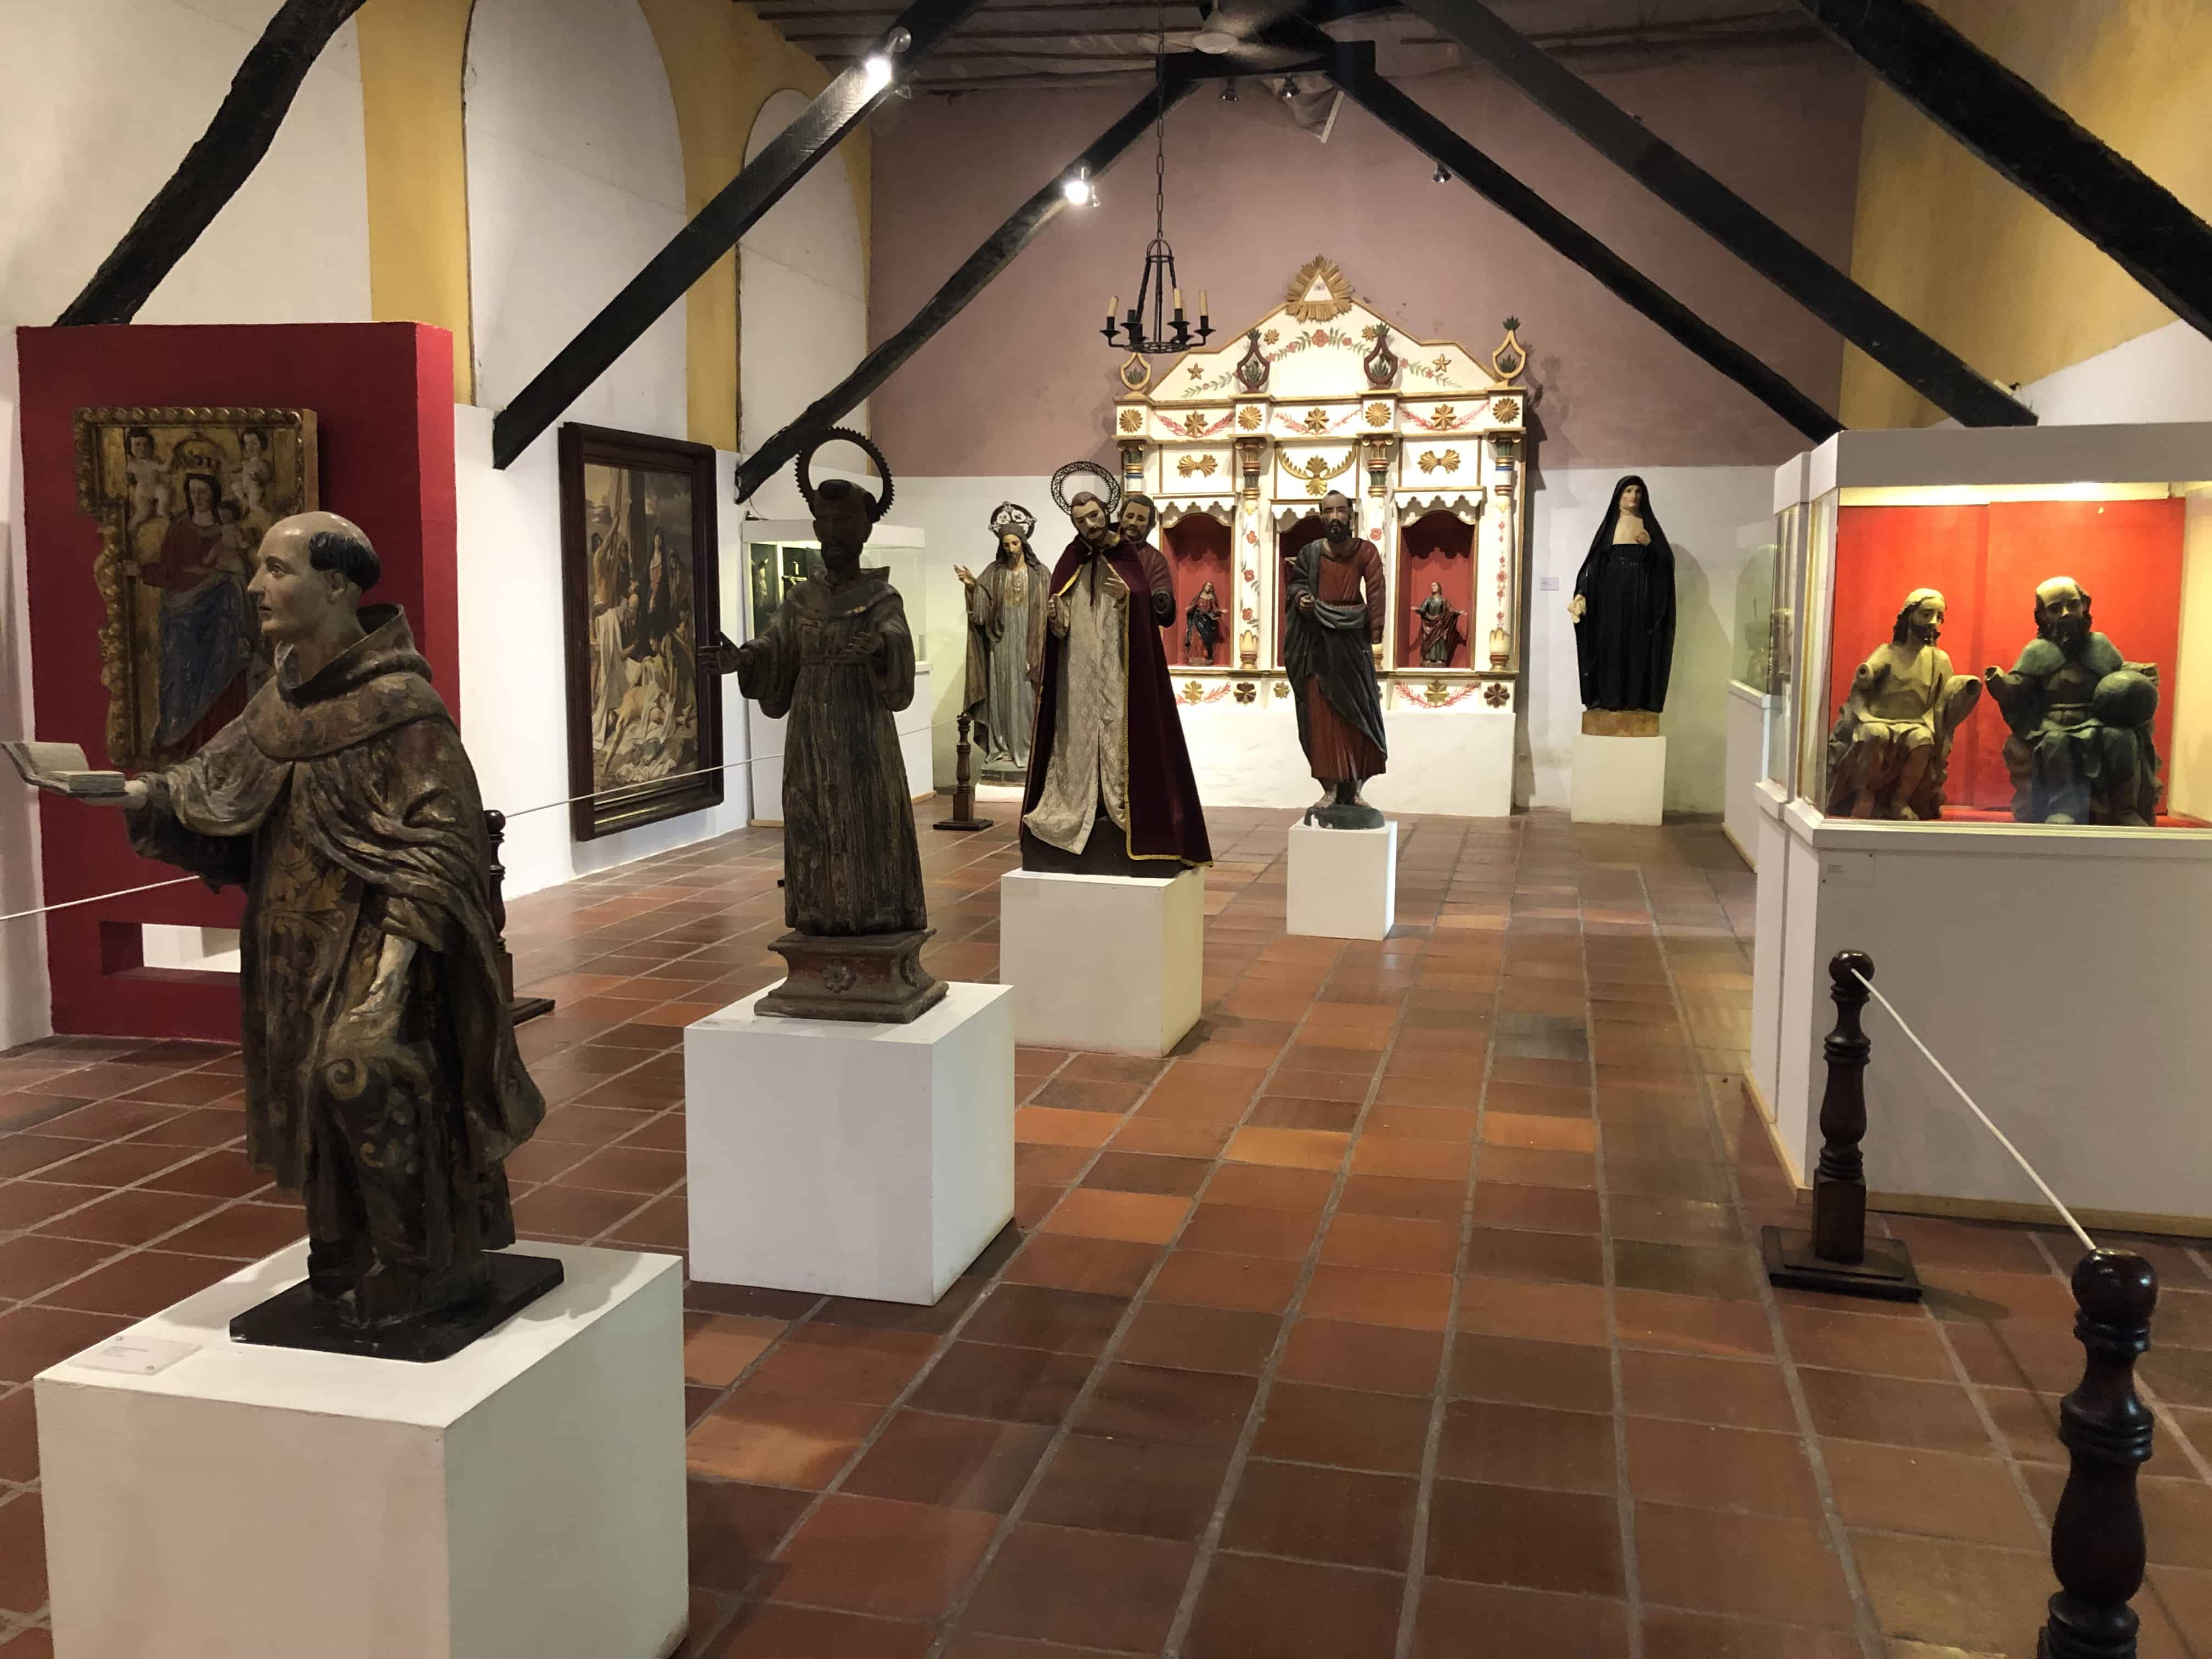 Religious art collection at the Sanctuary of San Pedro Claver Museum in Cartagena, Colombia